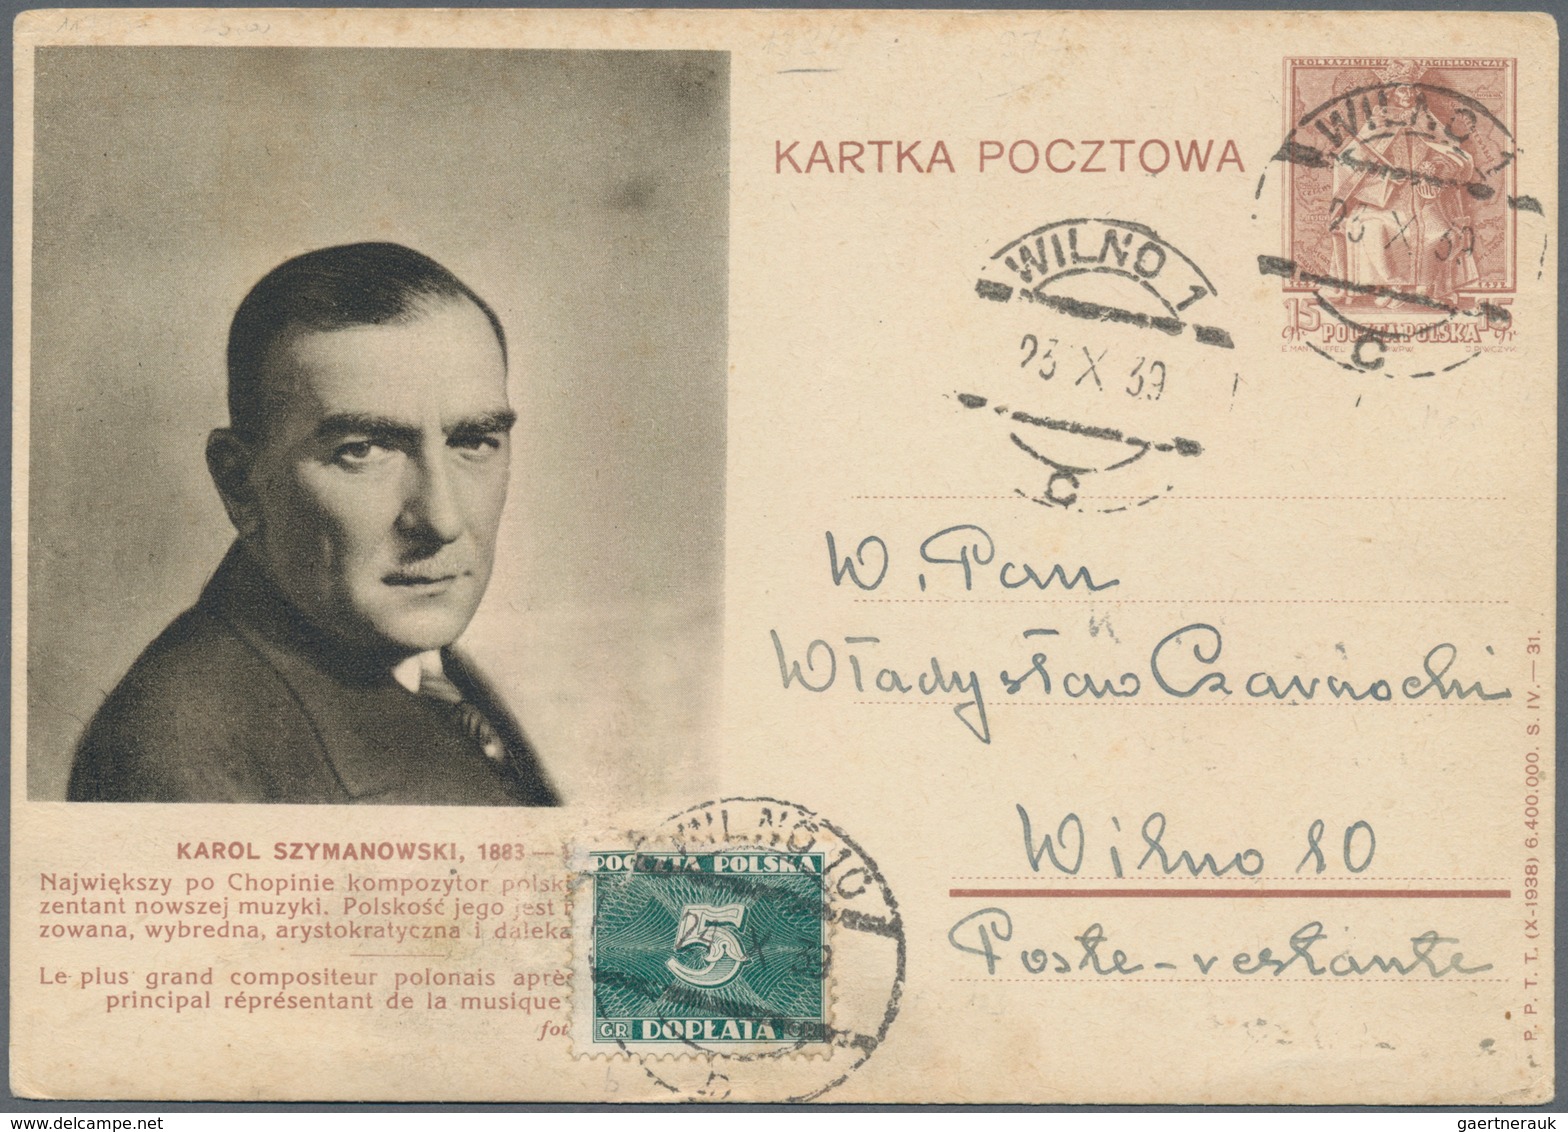 Litauen: 1949/1944, Lithuania during WWII, assortment of 34 covers/cards/stationeries, comprising PO